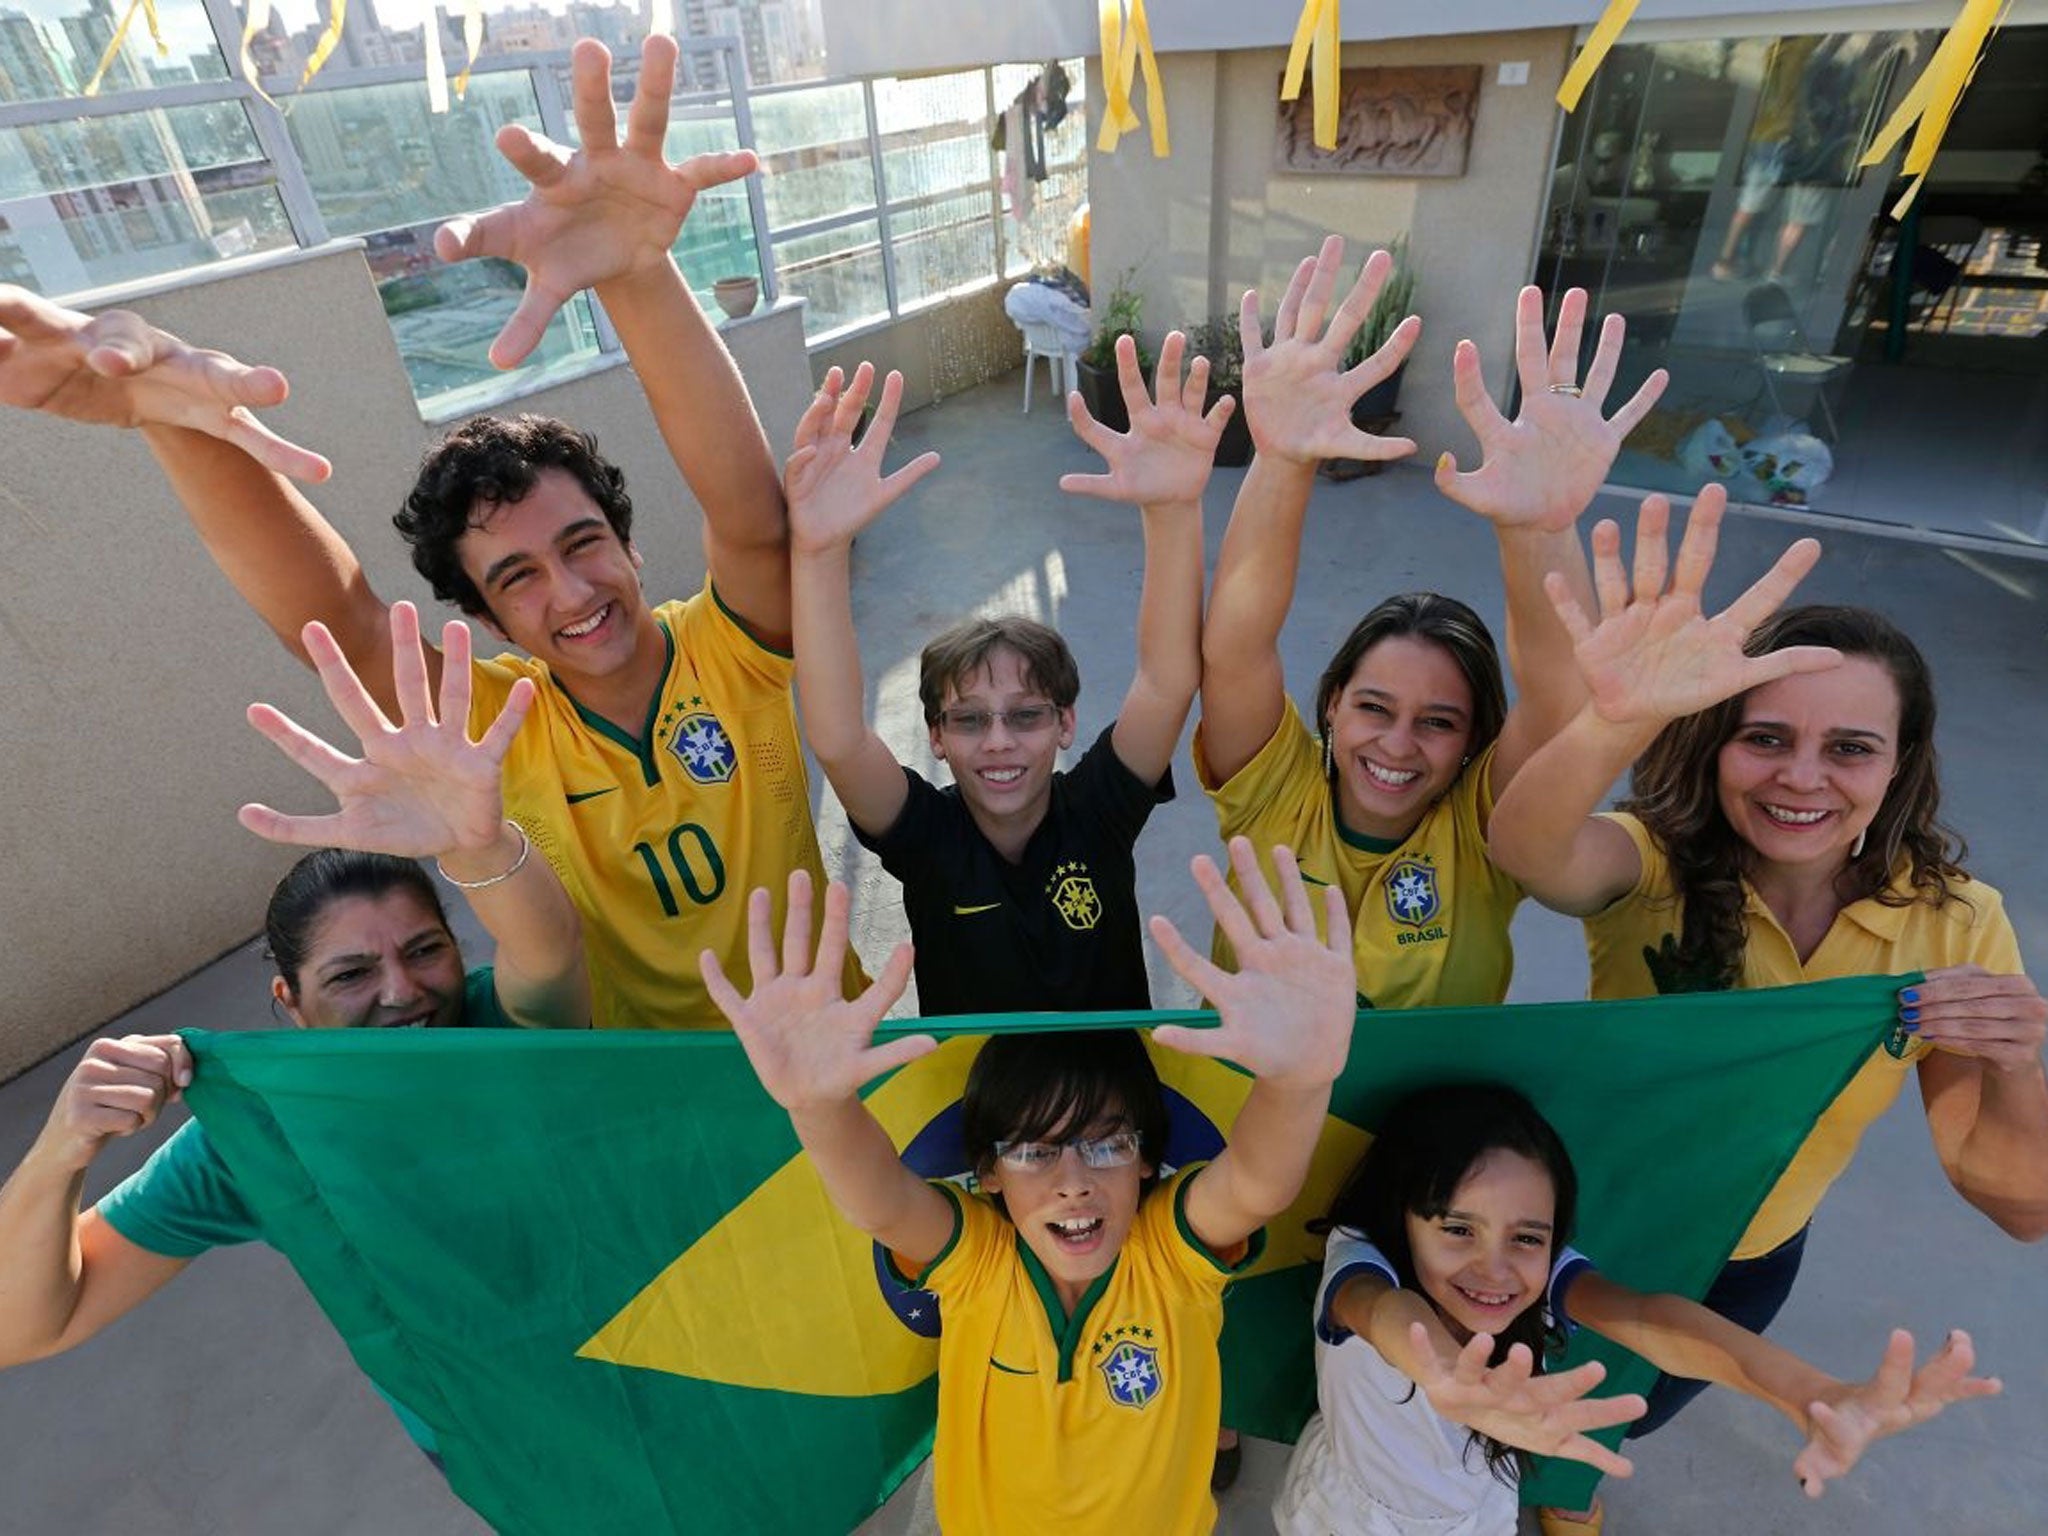 Members of the Silva family, back row, from left, Silvia Santos, Joao de Assis, Pedro de Assis, Ana Carolina Santos and Silvana Santos, front row, Bernardo de Assis, left, and Maria Morena Santos, pose for a photo in their home to show that they each have